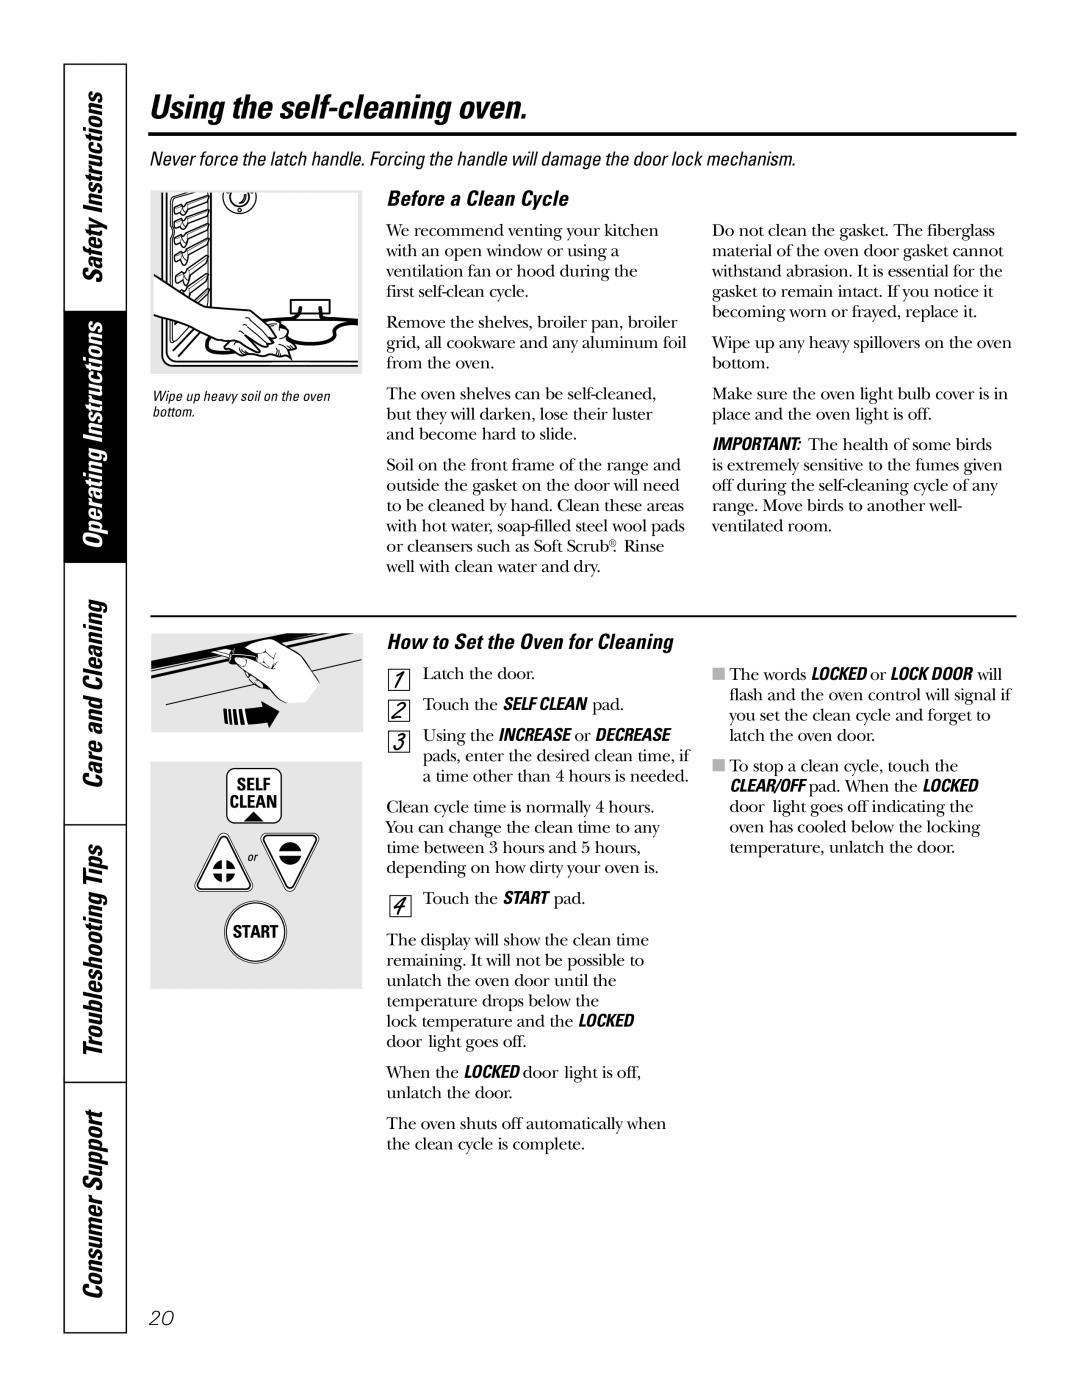 GE JRP80 owner manual Using the self-cleaning oven, Operating Instructions Safety, Before a Clean Cycle 